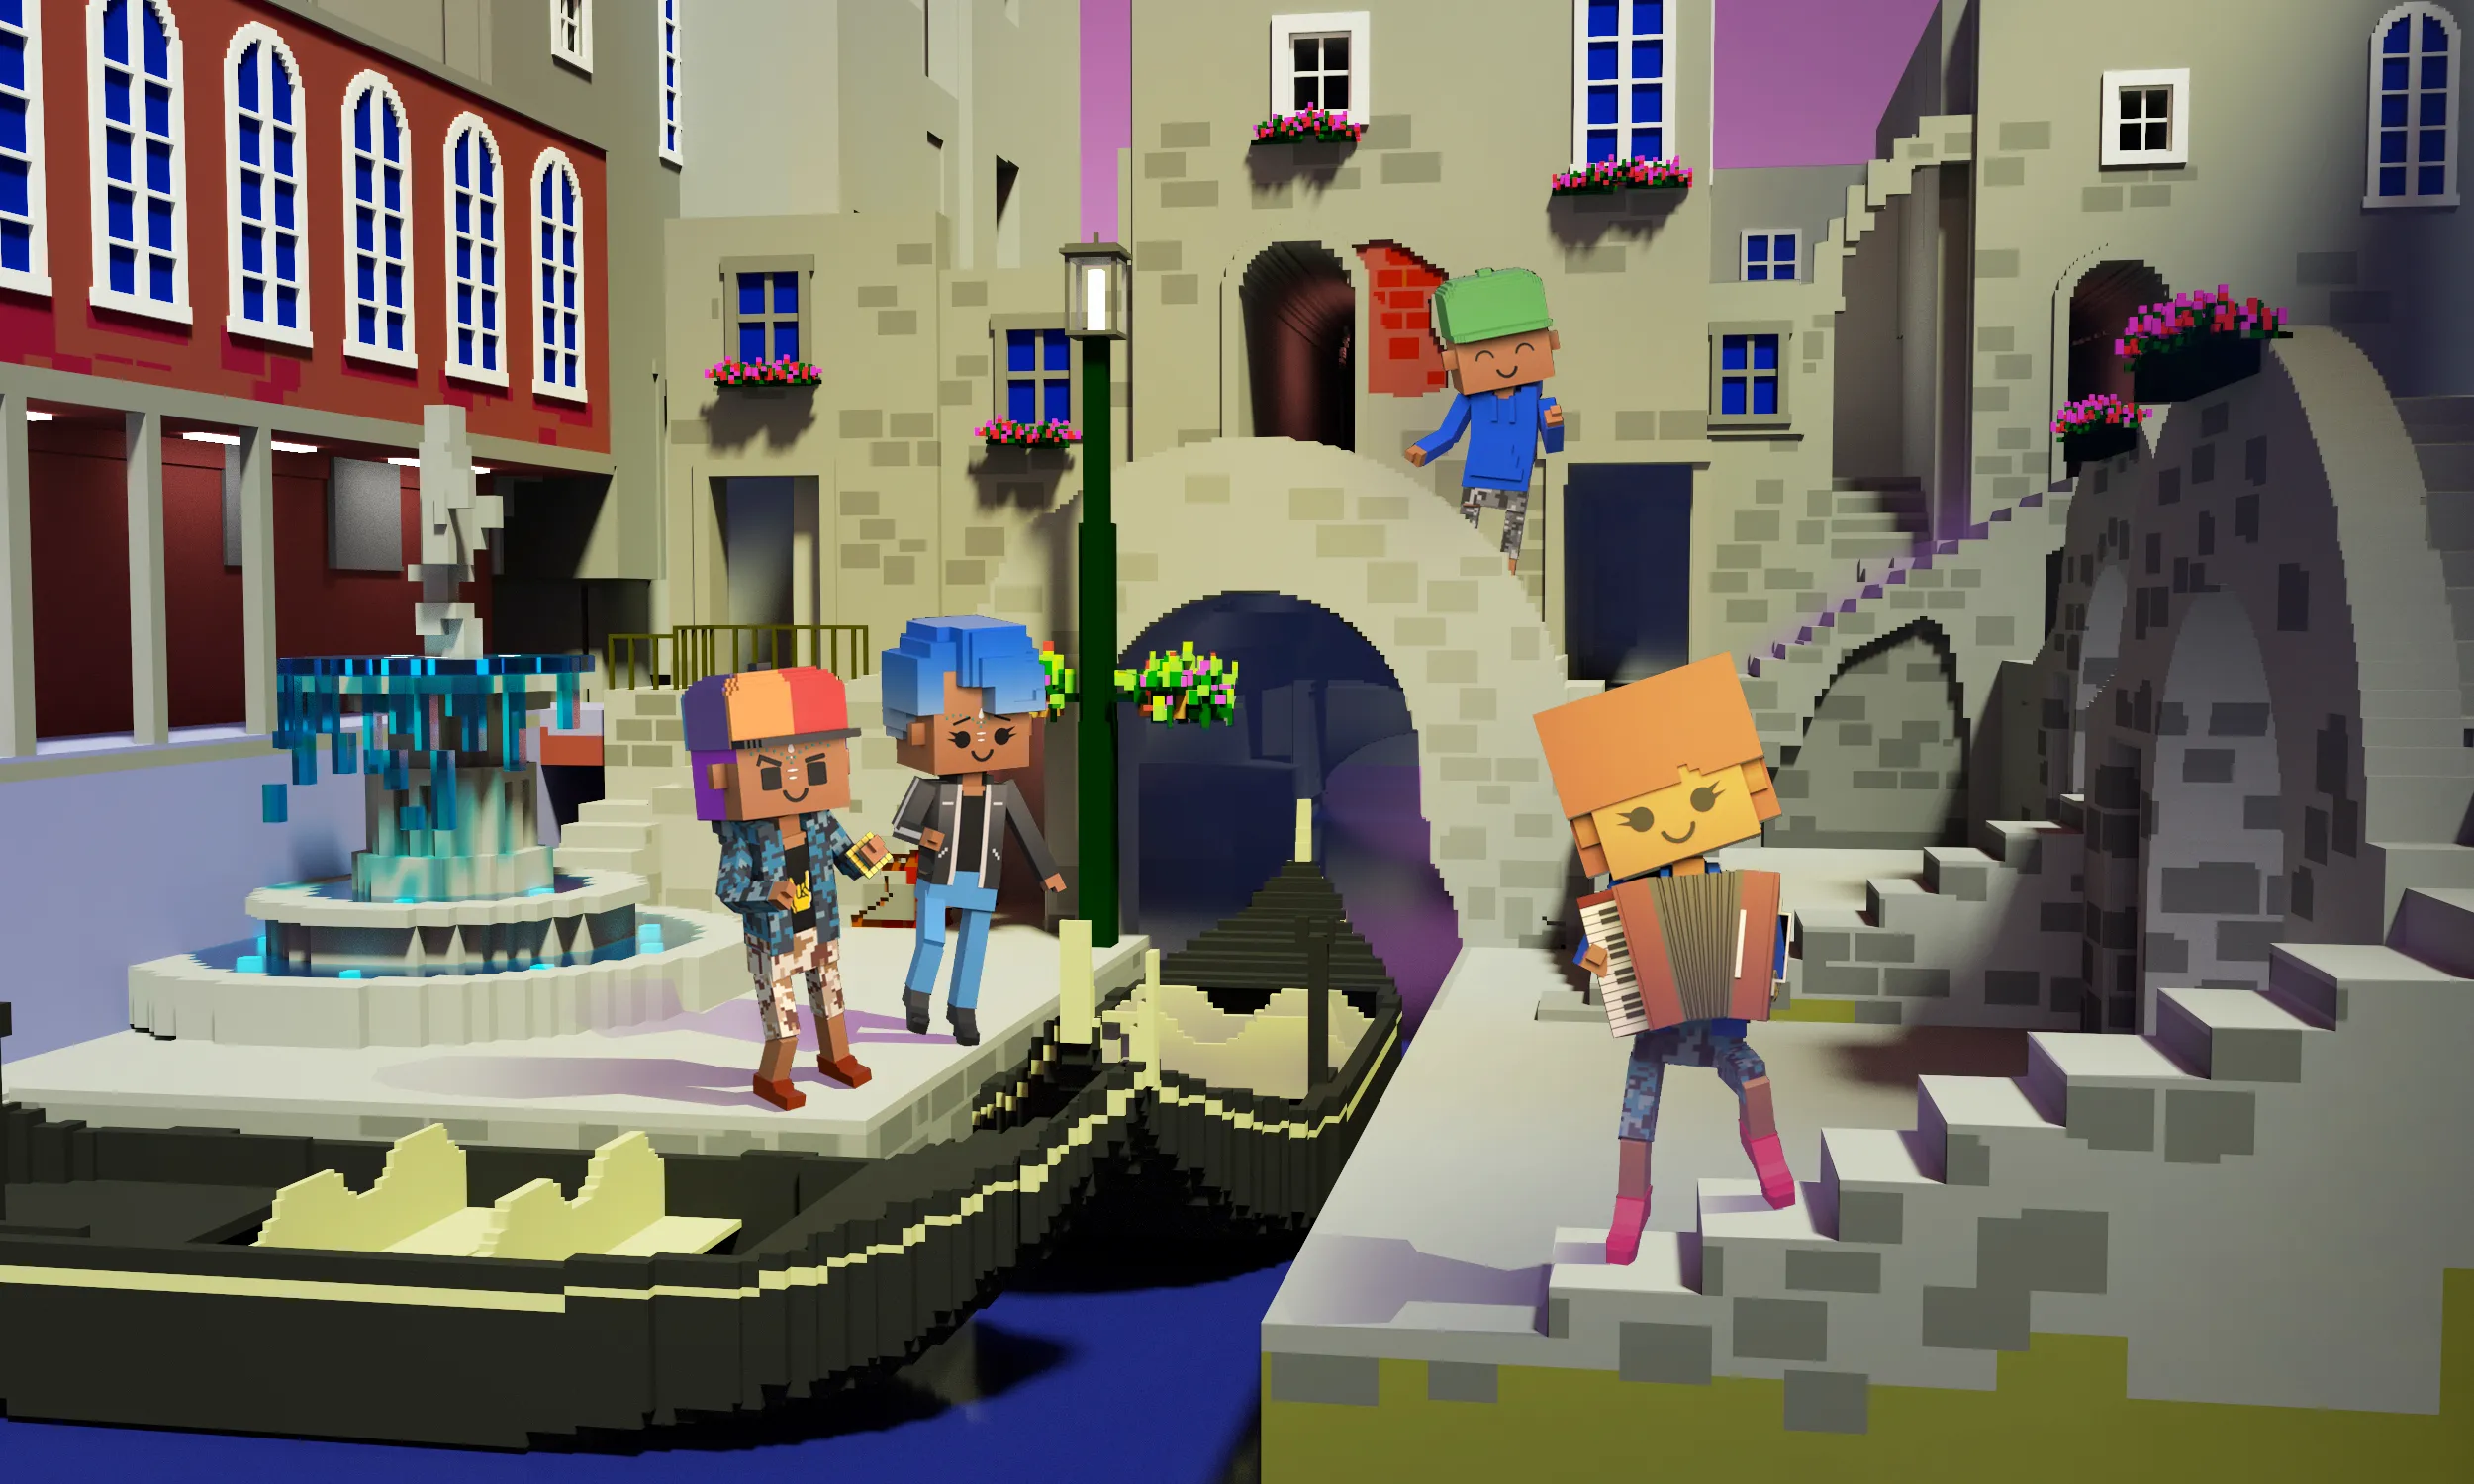 A Blockstars photo shows three people enjoying music near a canal in one of the cities in the game. One plays an instrument while the others jam along.